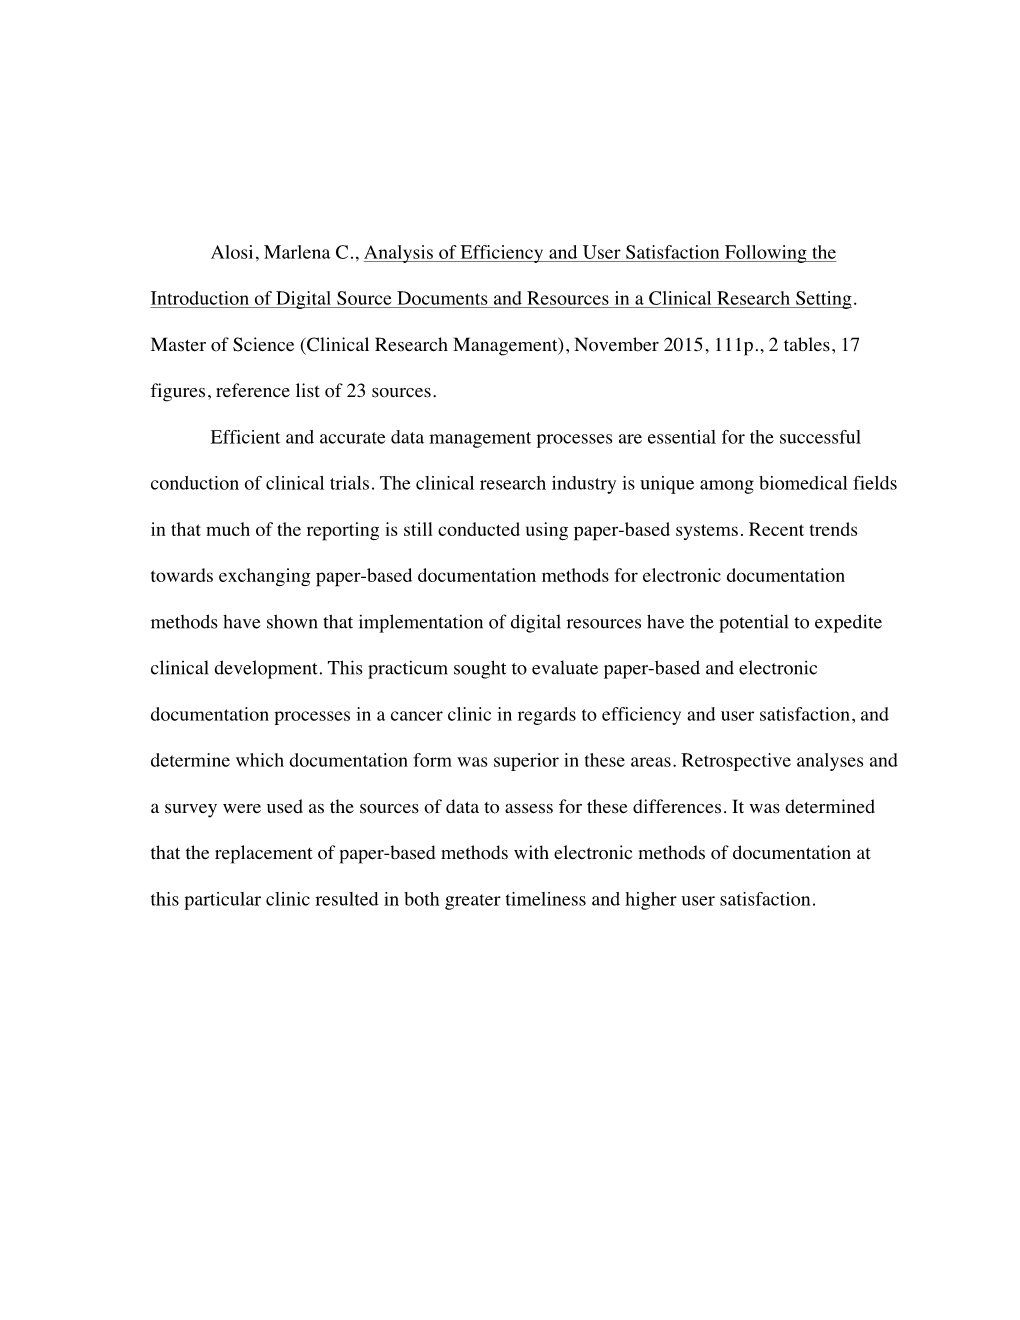 Alosi, Marlena C., Analysis of Efficiency and User Satisfaction Following The